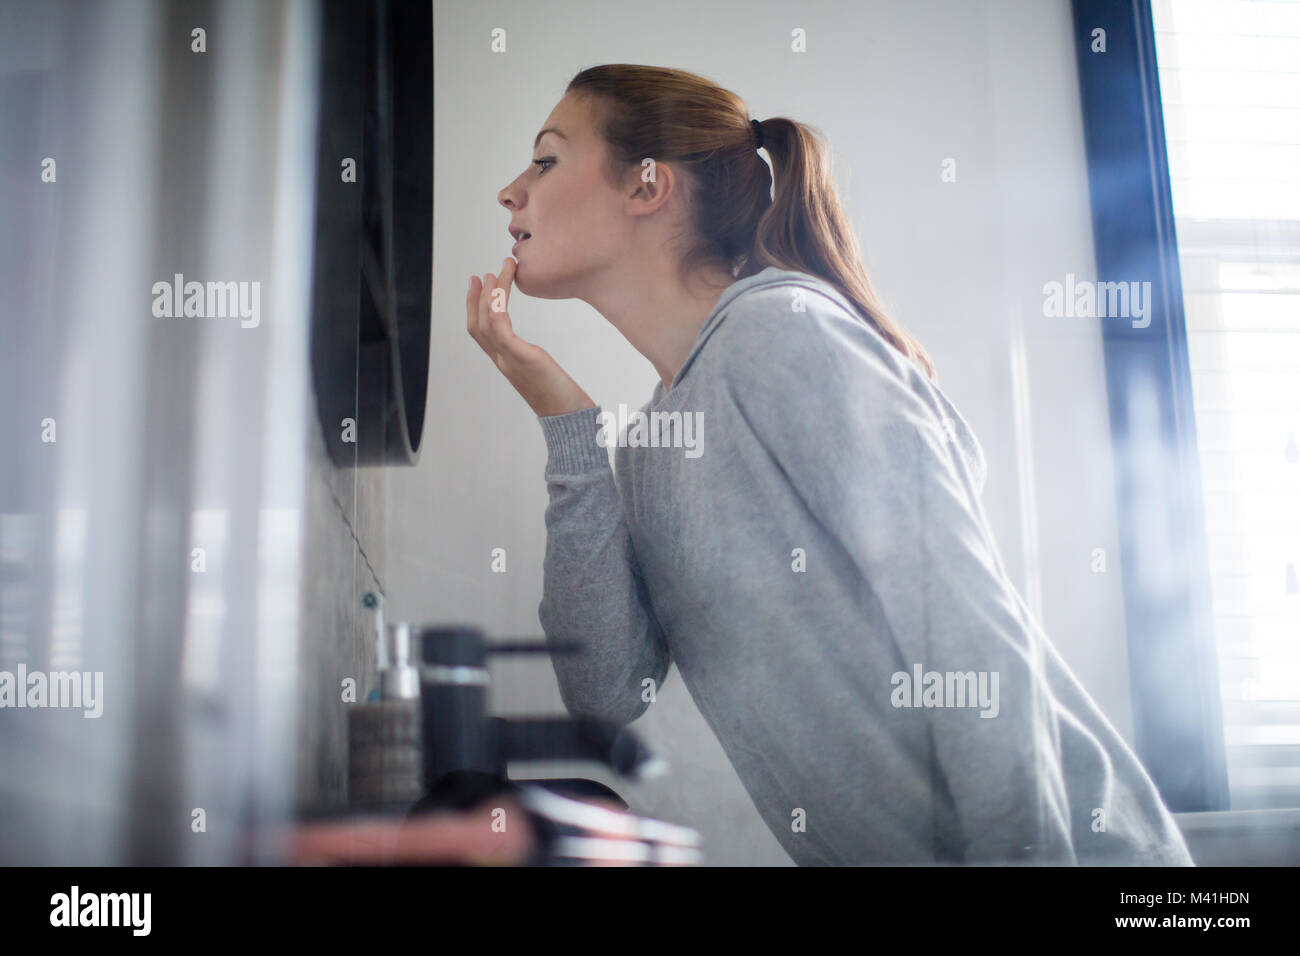 Young adult female putting looking at reflection in bathroom mirror Stock Photo